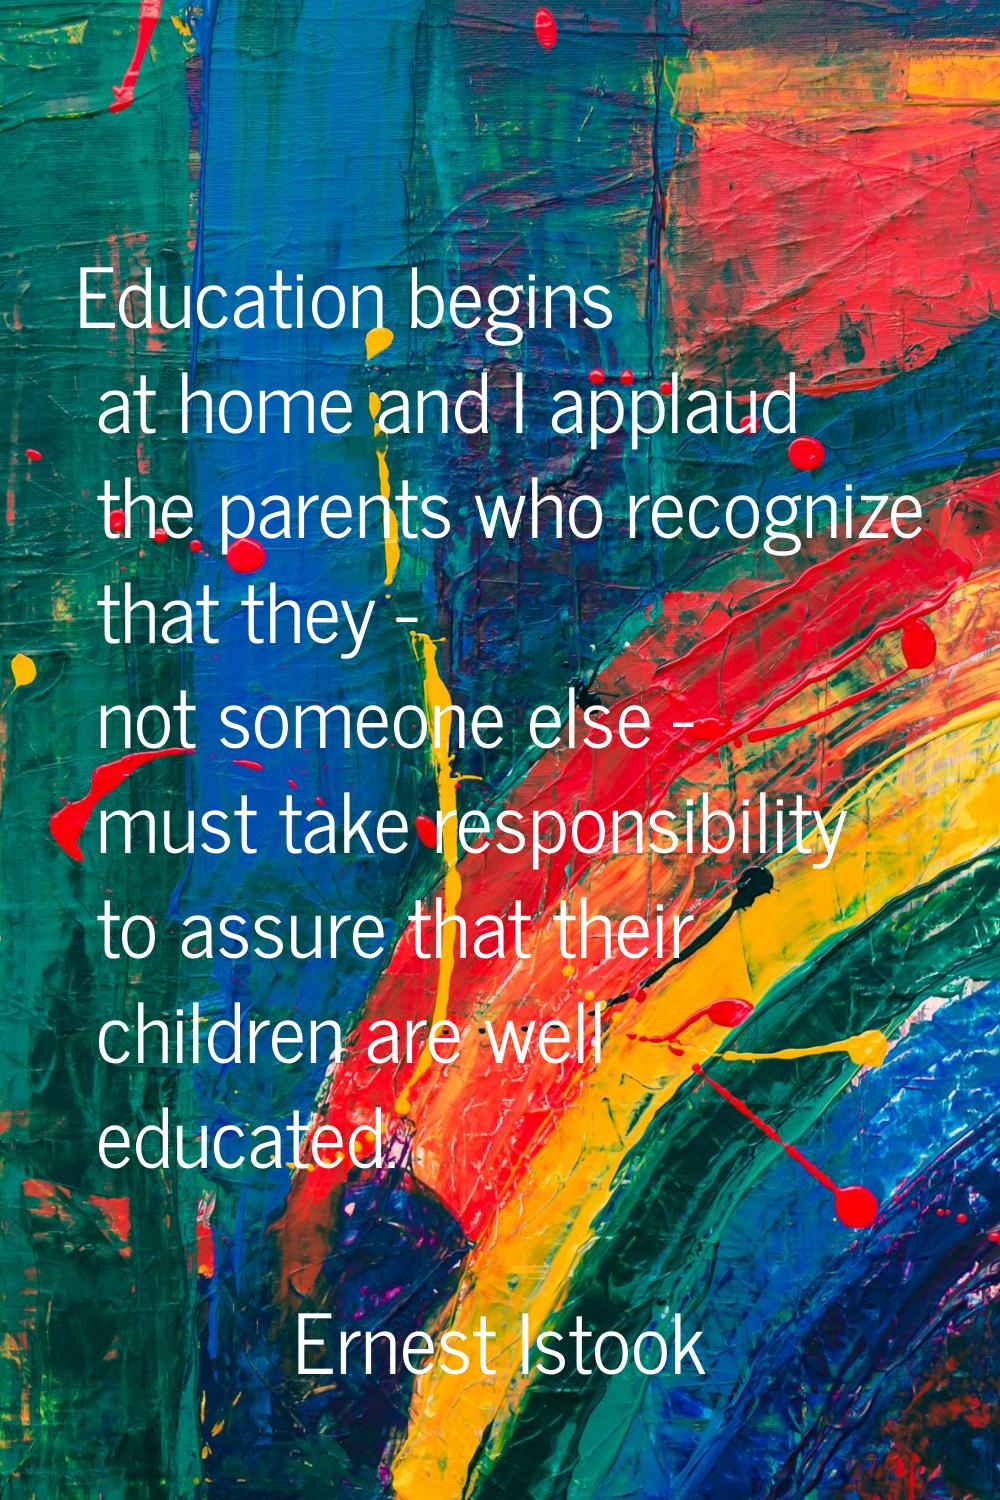 Education begins at home and I applaud the parents who recognize that they - not someone else - mus